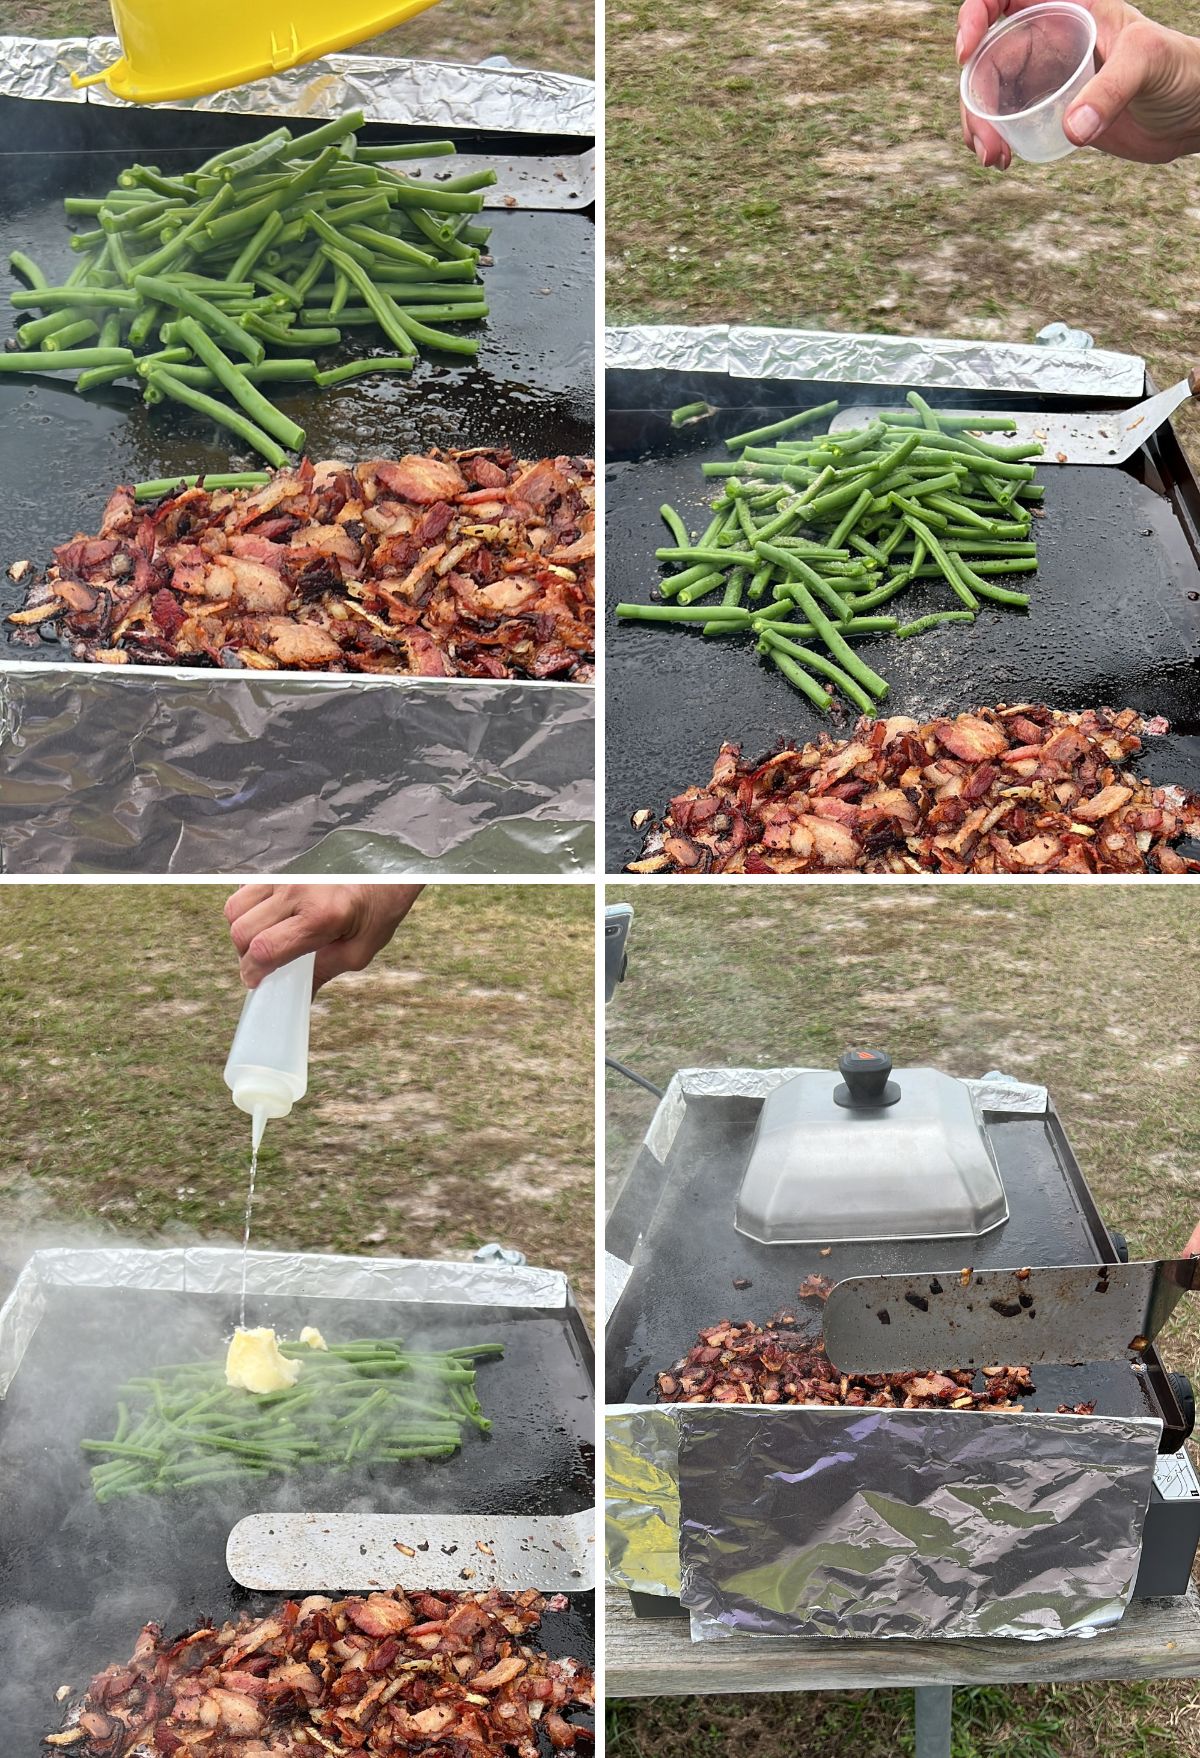 A collage showing the process of cooking bacon and green beans on an outdoor grill, including adding ingredients and covering the food with foil.